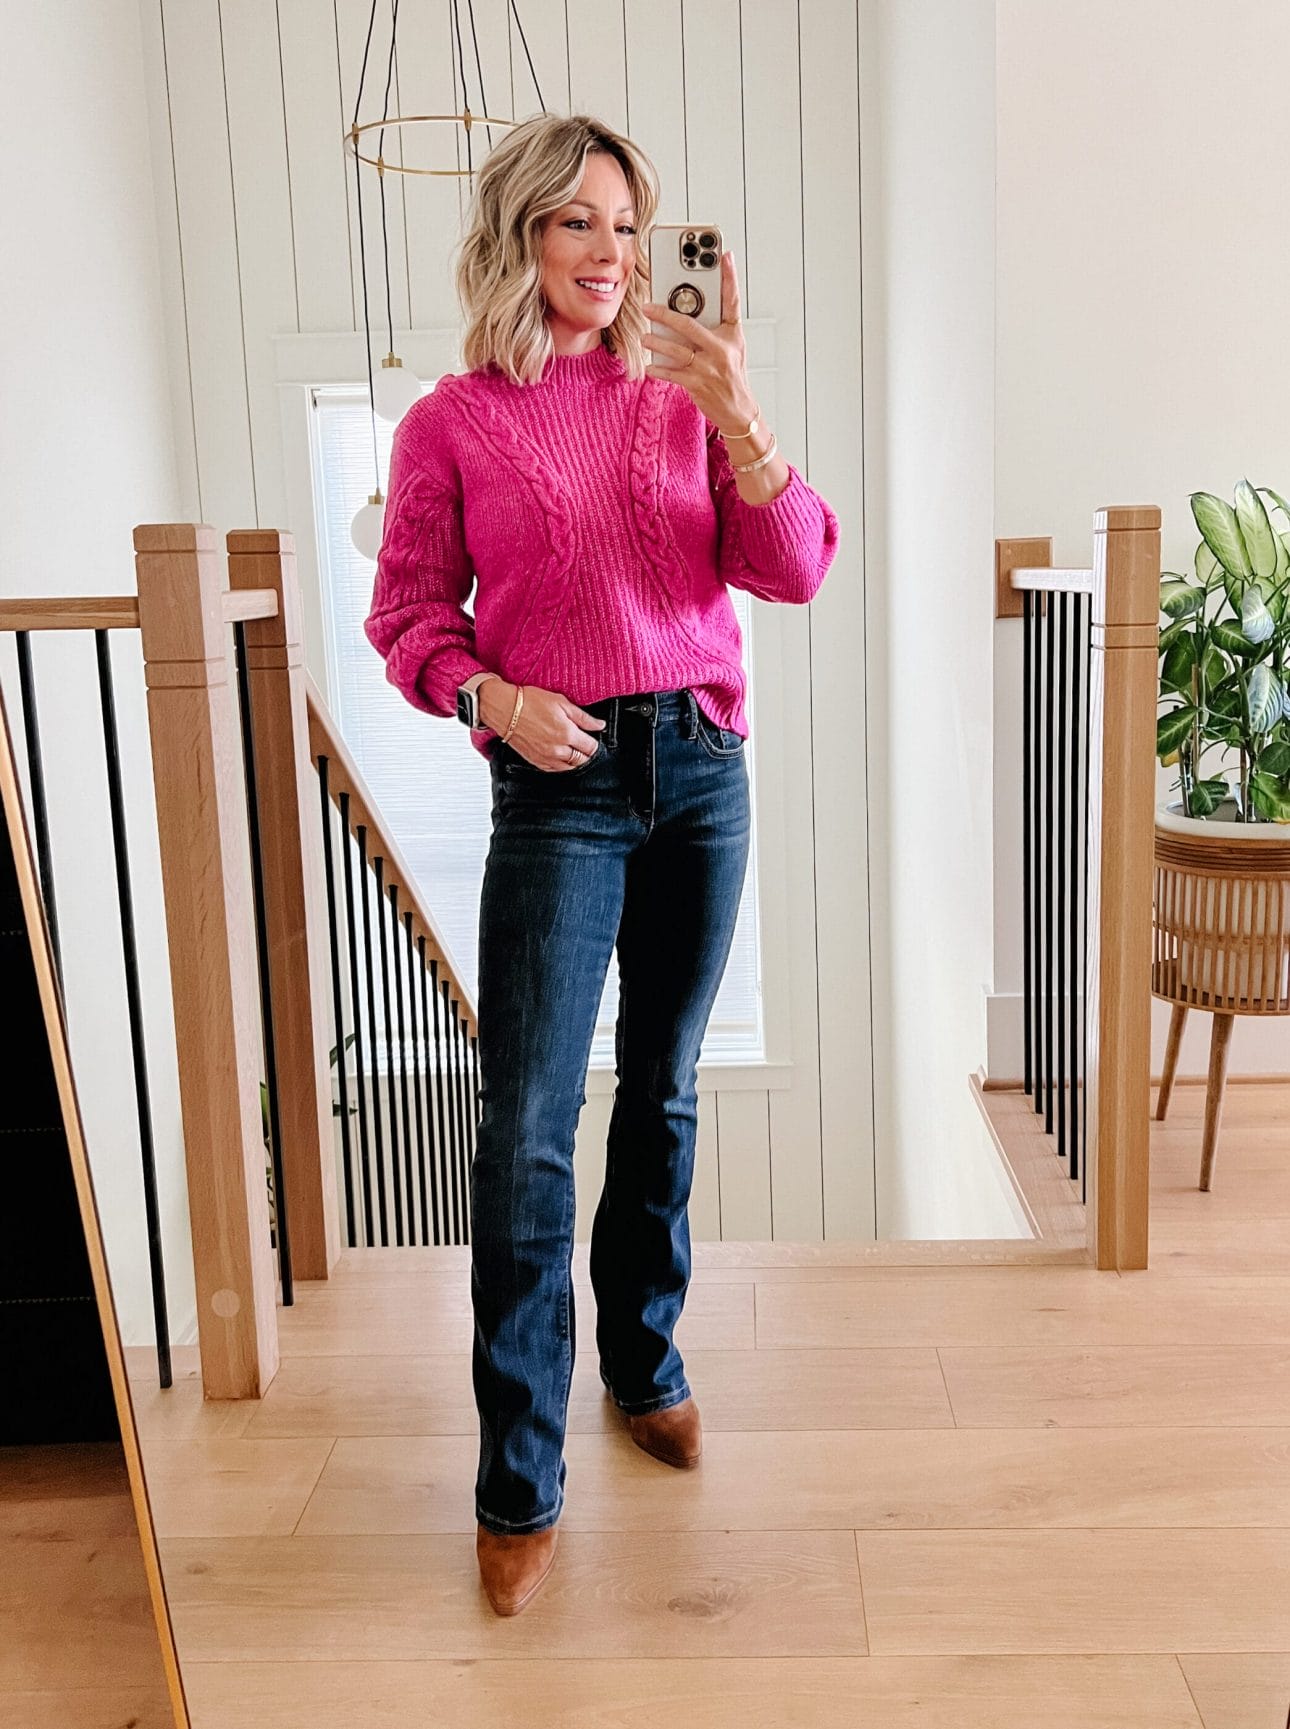 Walmart pink sweater and jeans outfit